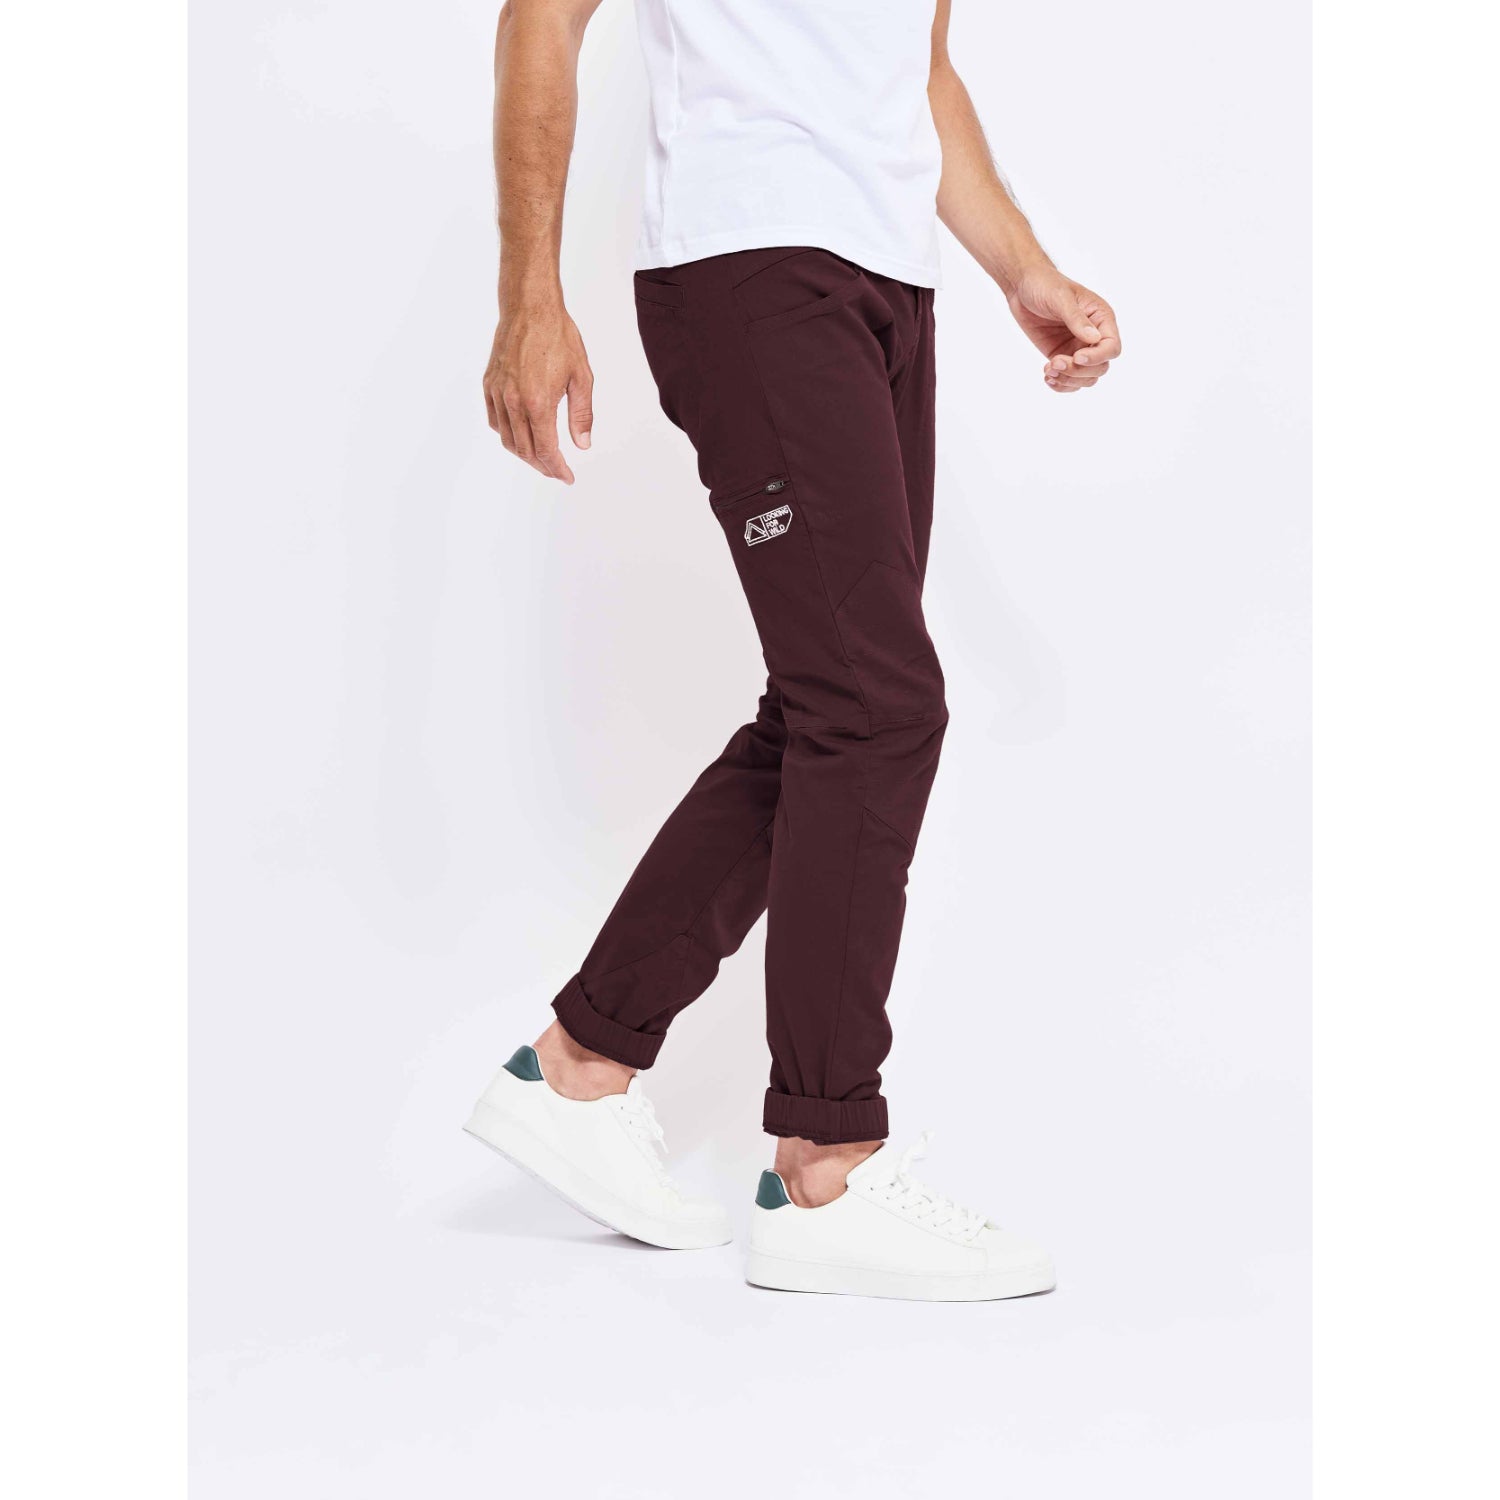 Looking For Wild Fitz Roy Pant - Mens (Raisin Rouge)